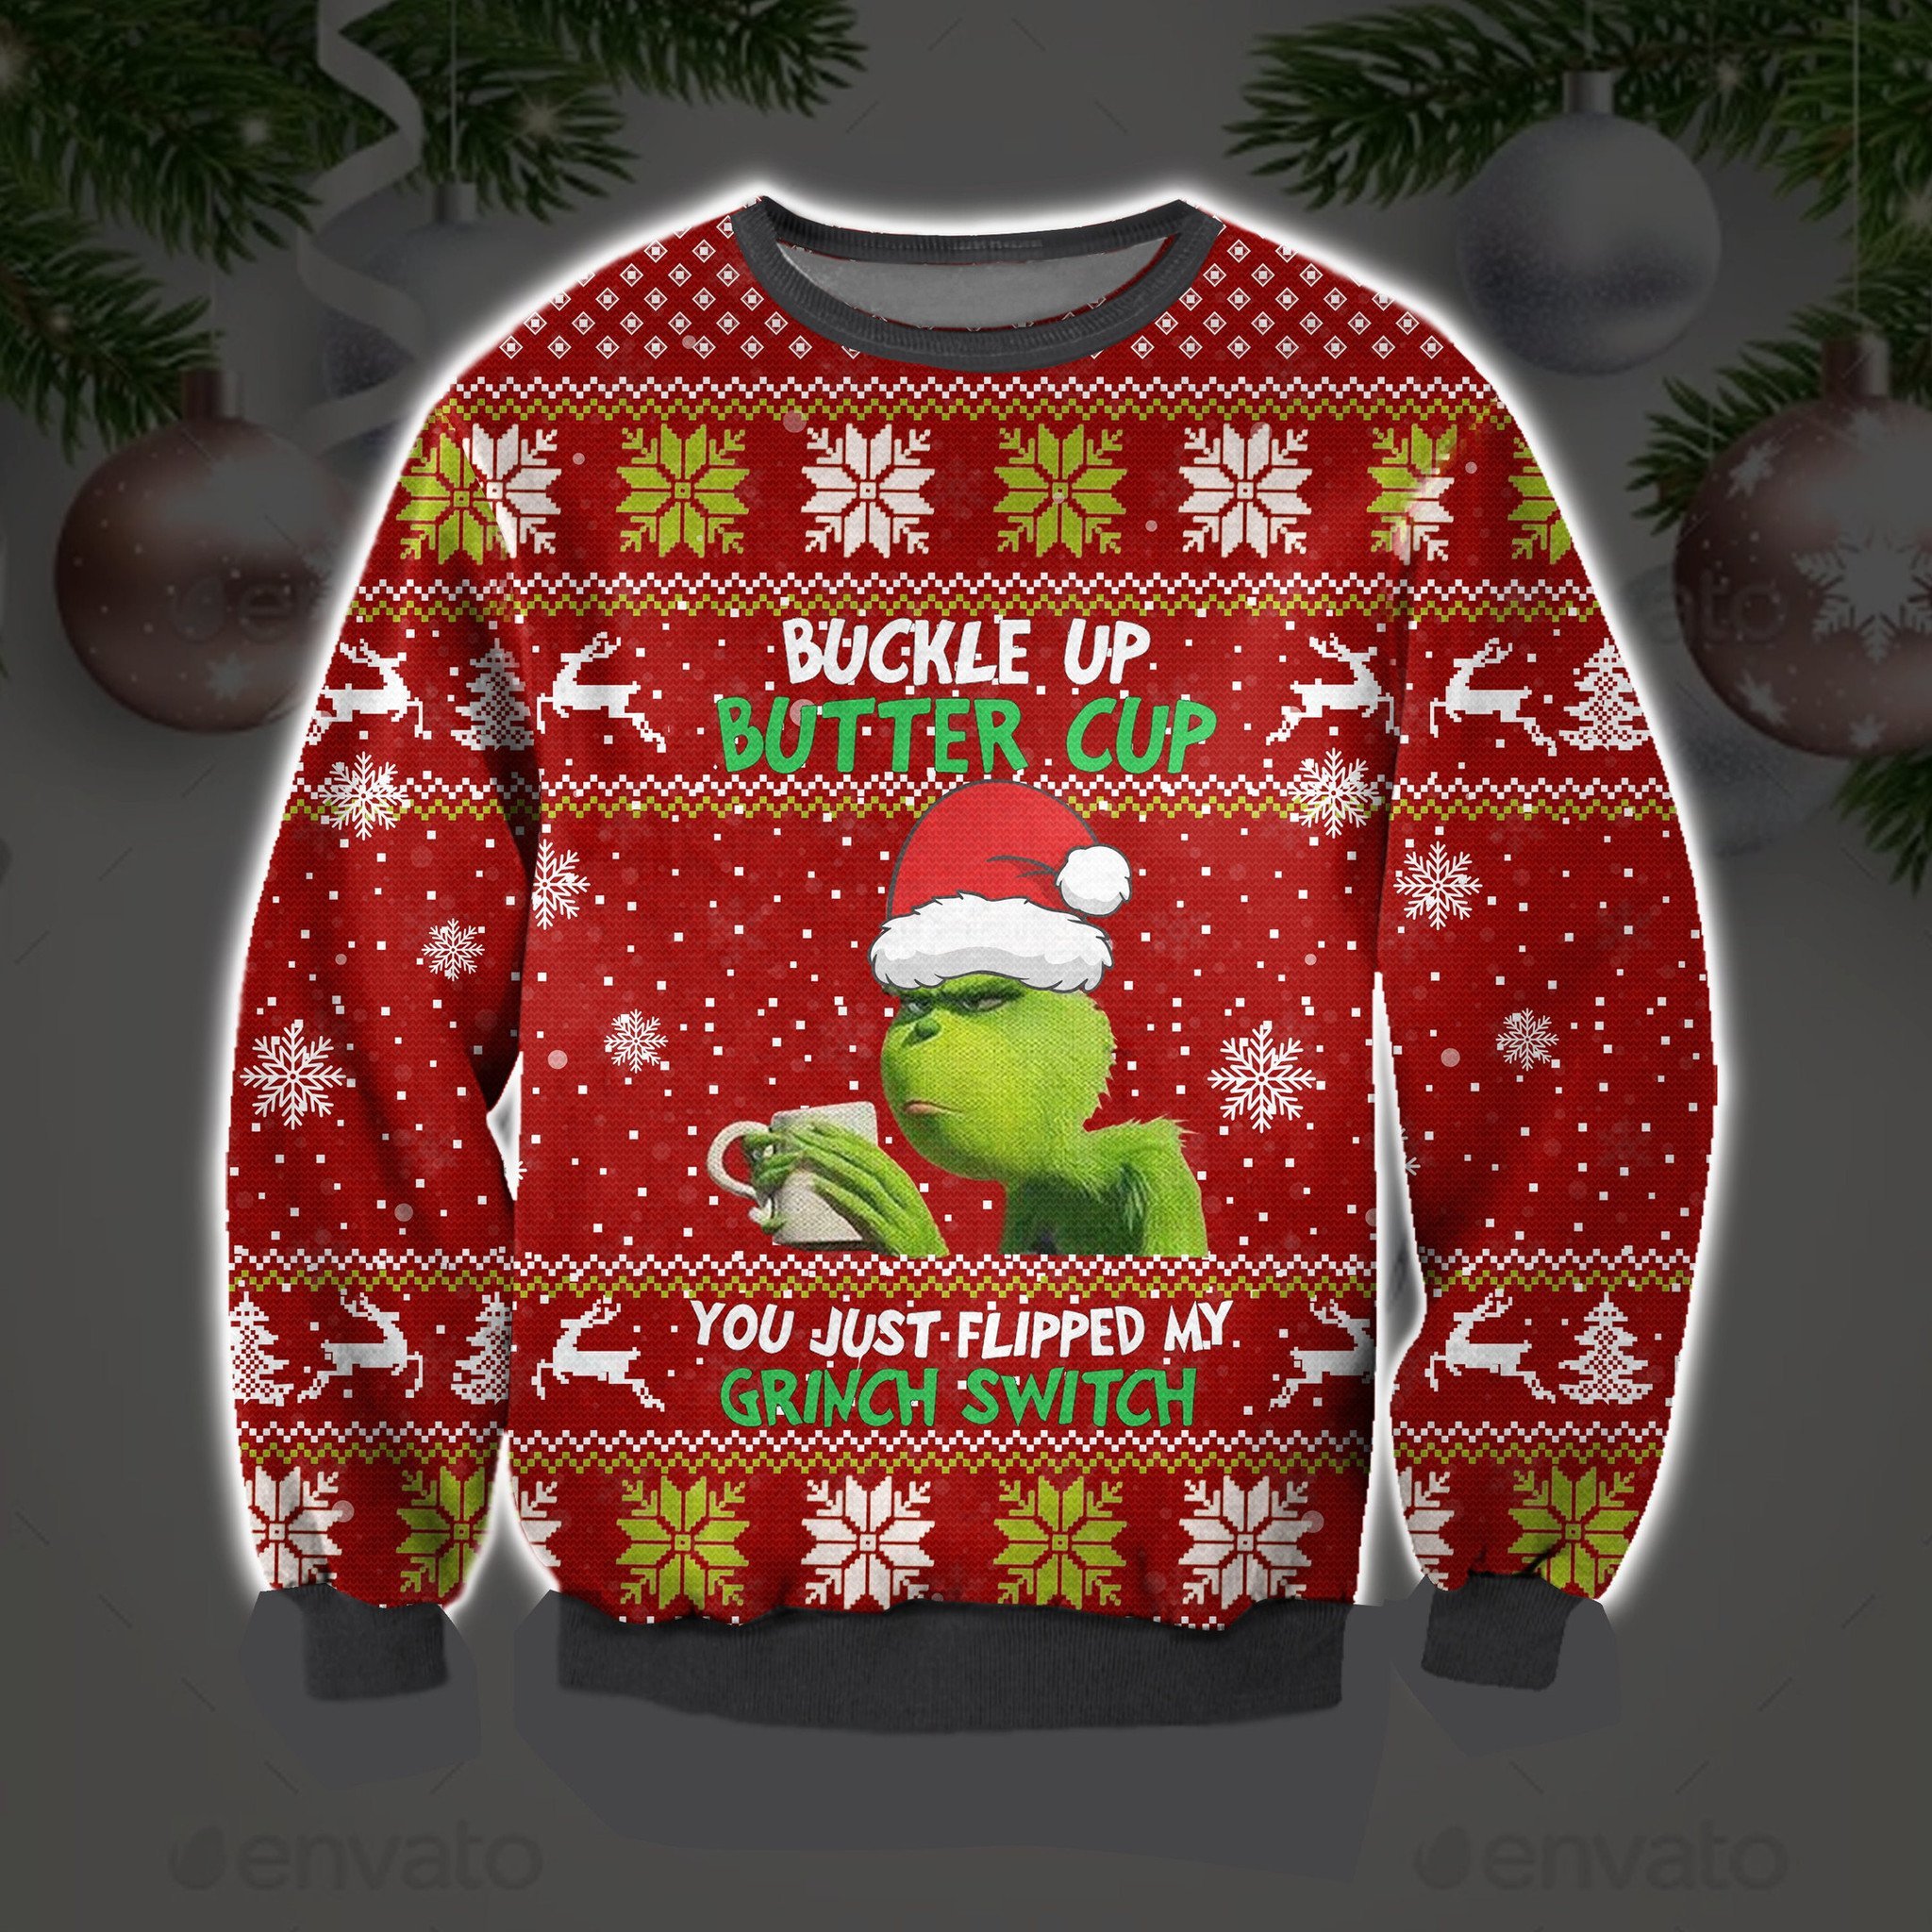 [ COOL ] Buckle up butter cup you just flipped my grinch switch ugly sweater – Saleoff 180122